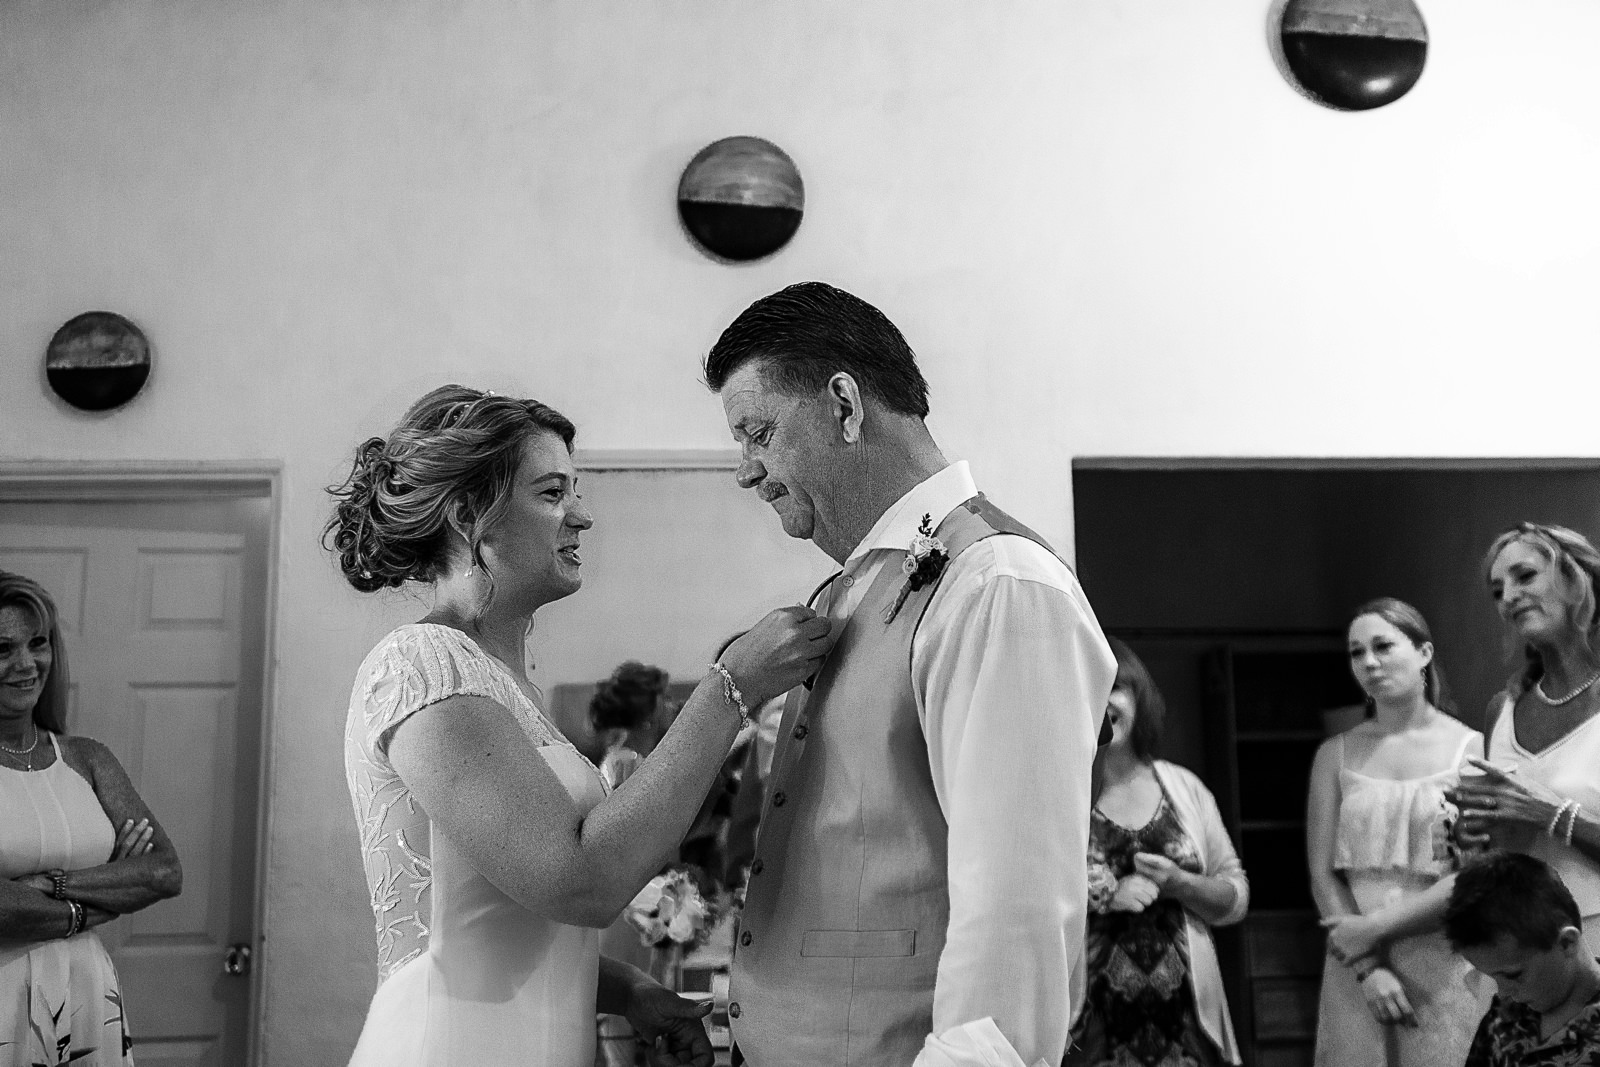 Bride fixing her father's suit and tie